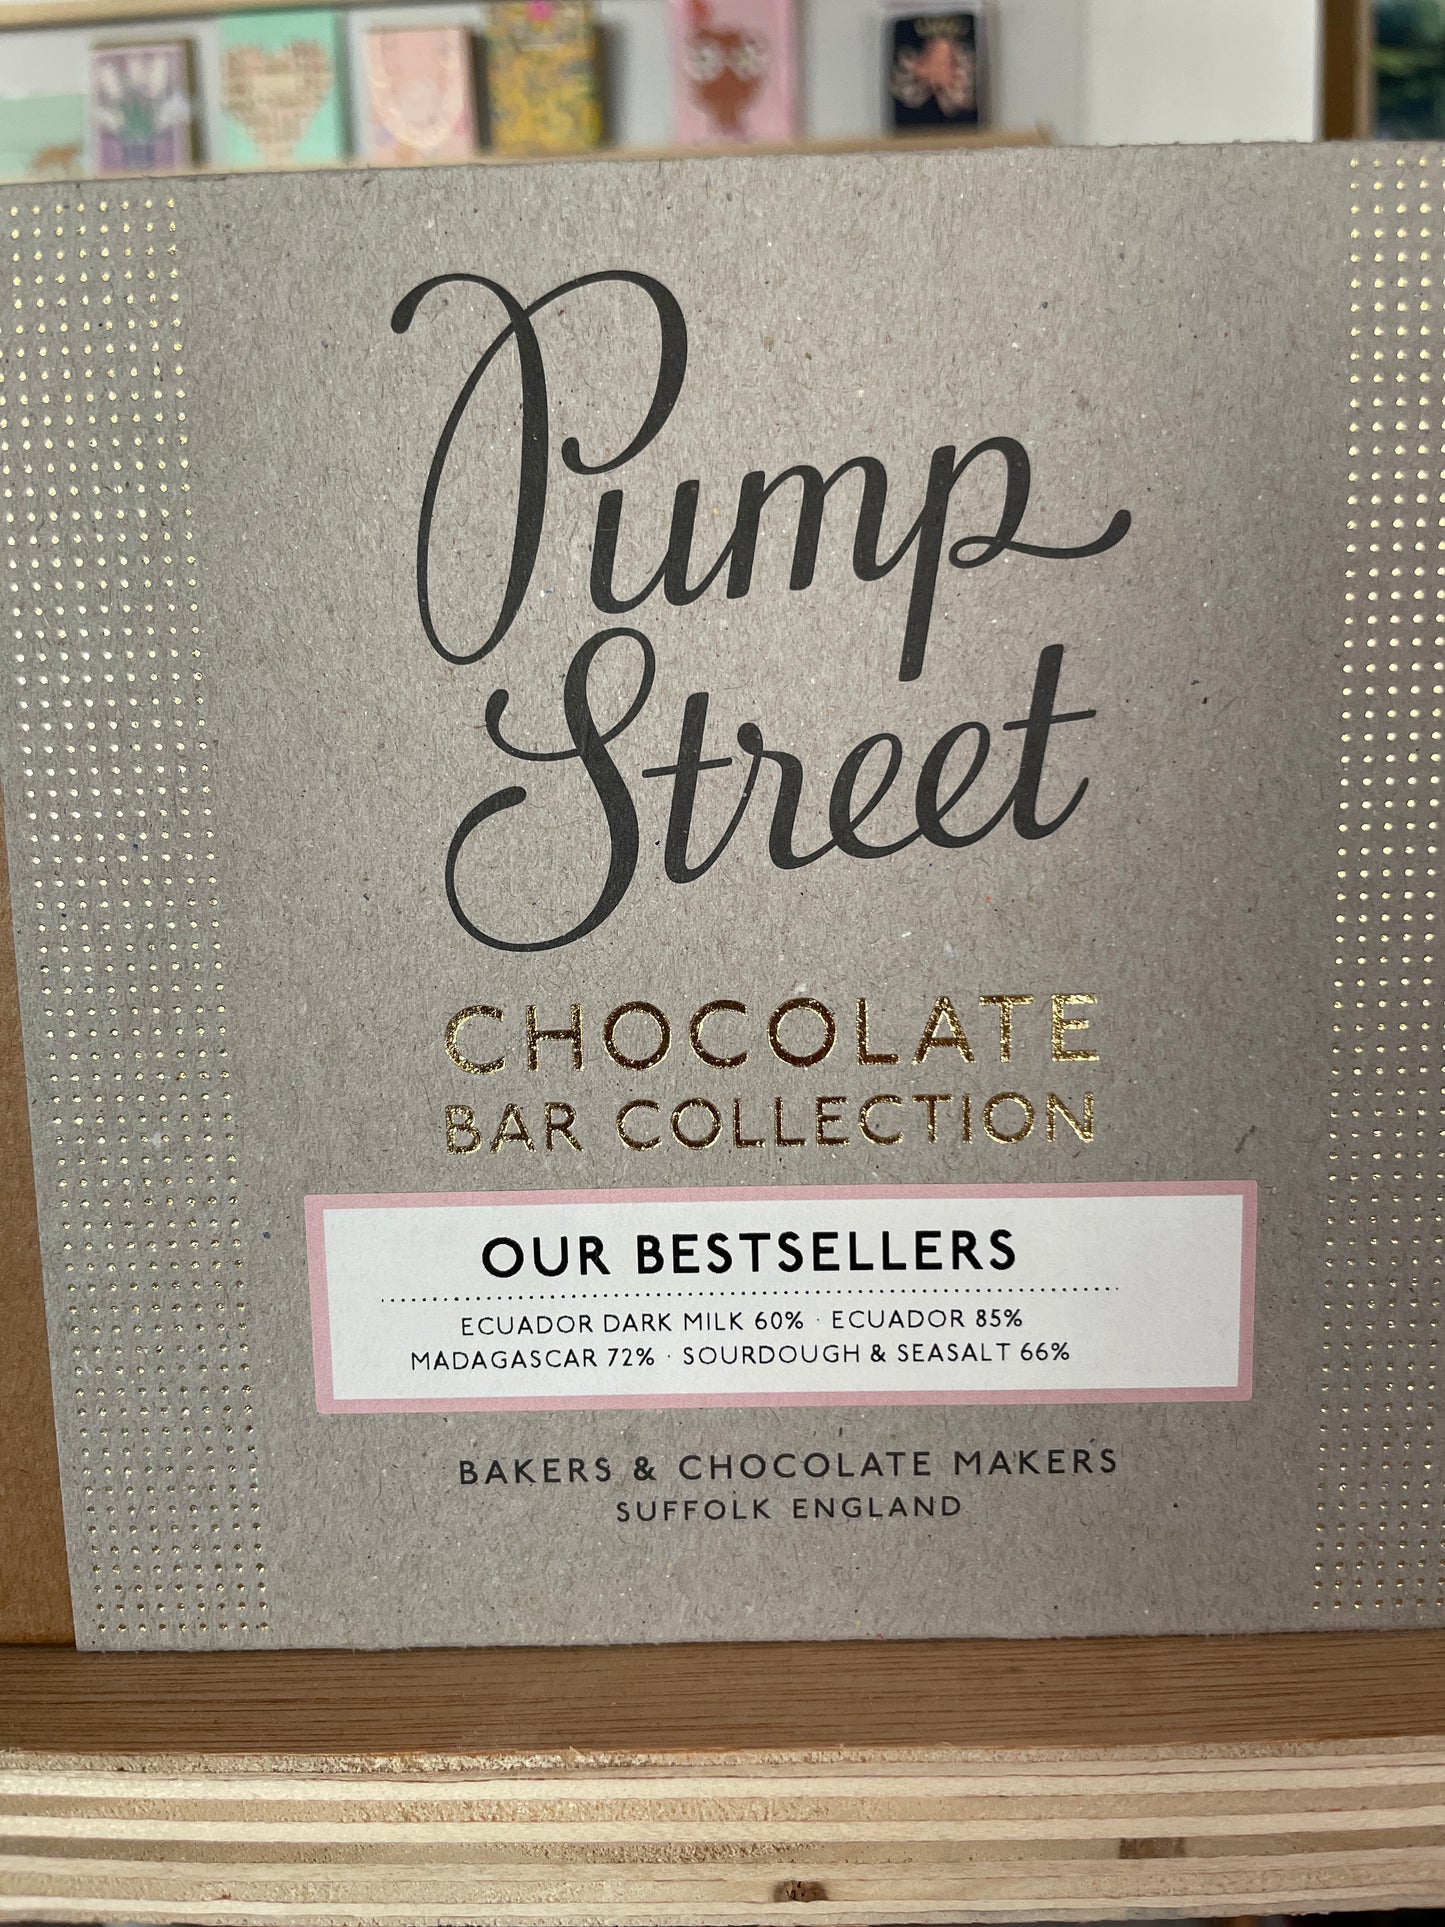 Pump Street - Chocolate Bar Collection - Our Bestsellers